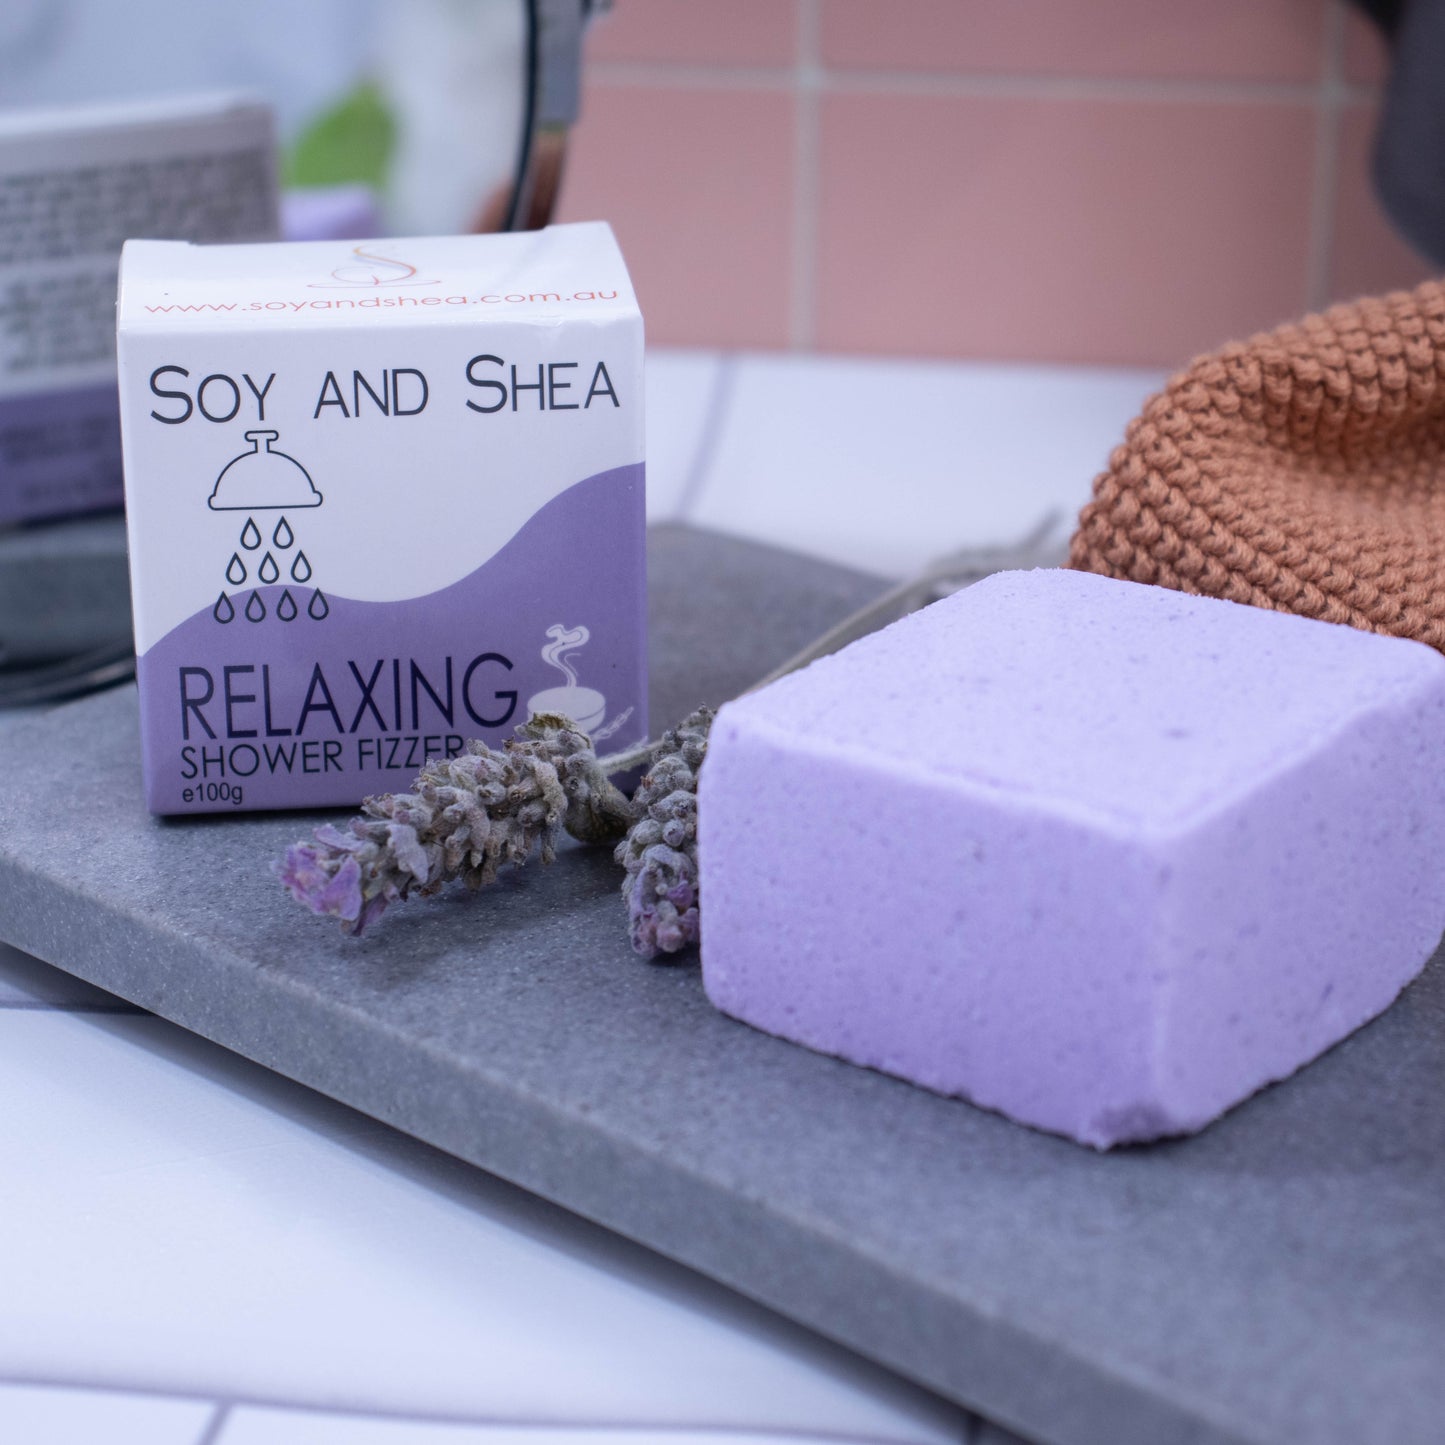 A light purple cube sits on a stone slab with a box of the product behind it.   Between them are two lavender flower spikes. The box is white with a purple wave design and shows details of the product. In the background is a mirror reflecting the back of the box which has additional writing.  Hanging against the pink tile background is a grey towel and a orange face cloth sits in front.